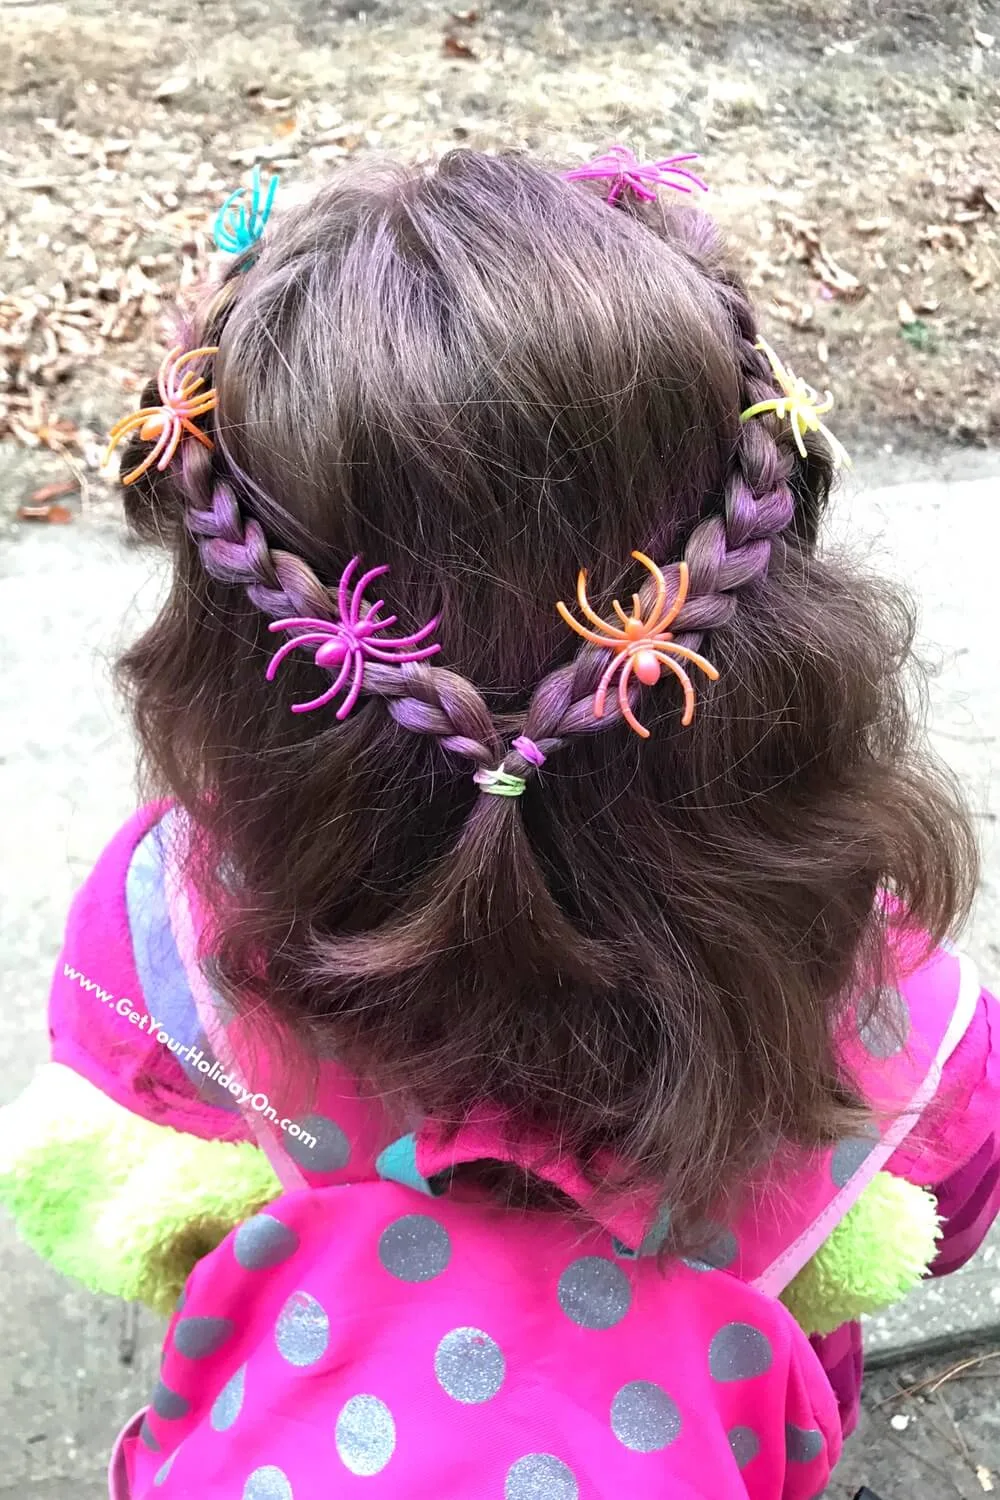 Halloween hair style with coloured hair chalk and spiders in braids.